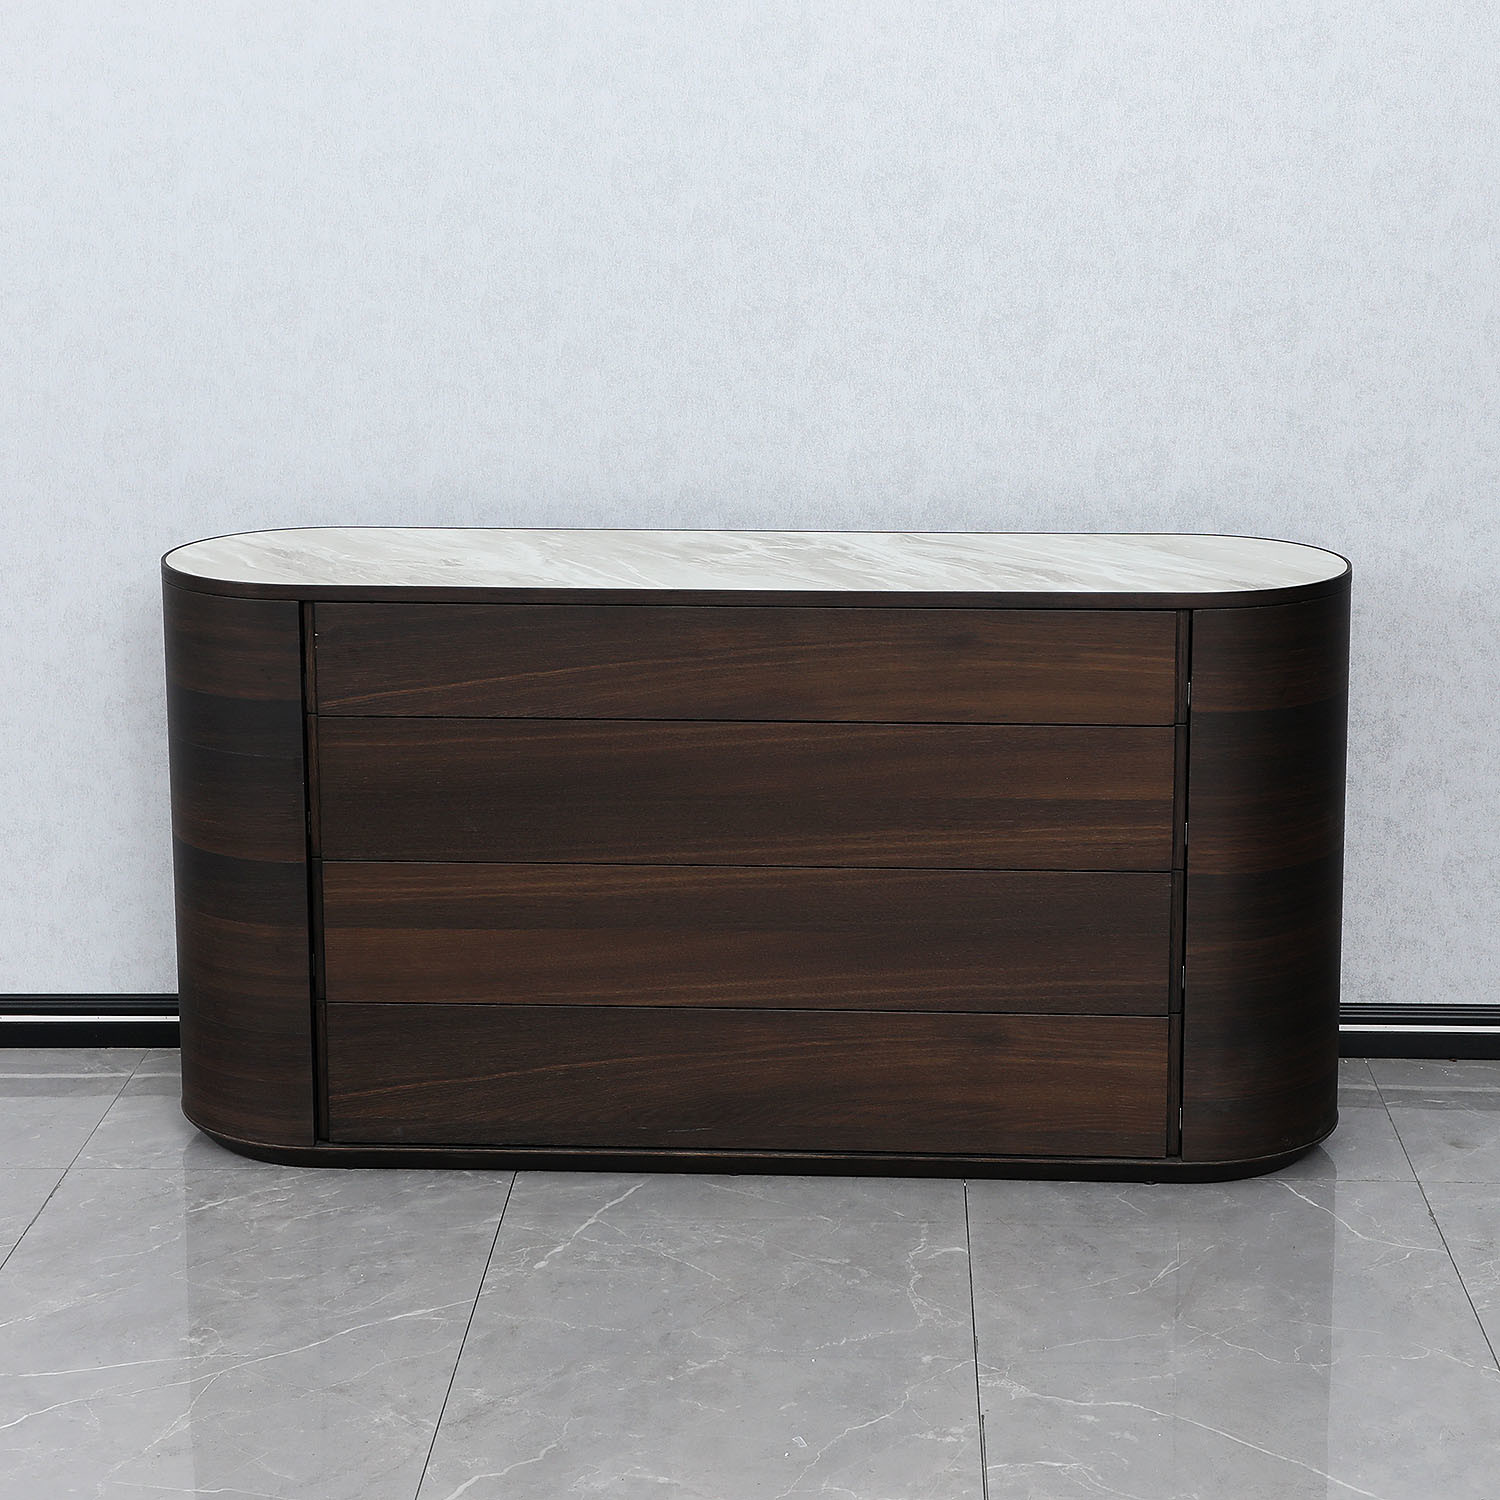 Modern Simple Design Wooden Storage Cabinet for Home Hotel Office Living Room Use